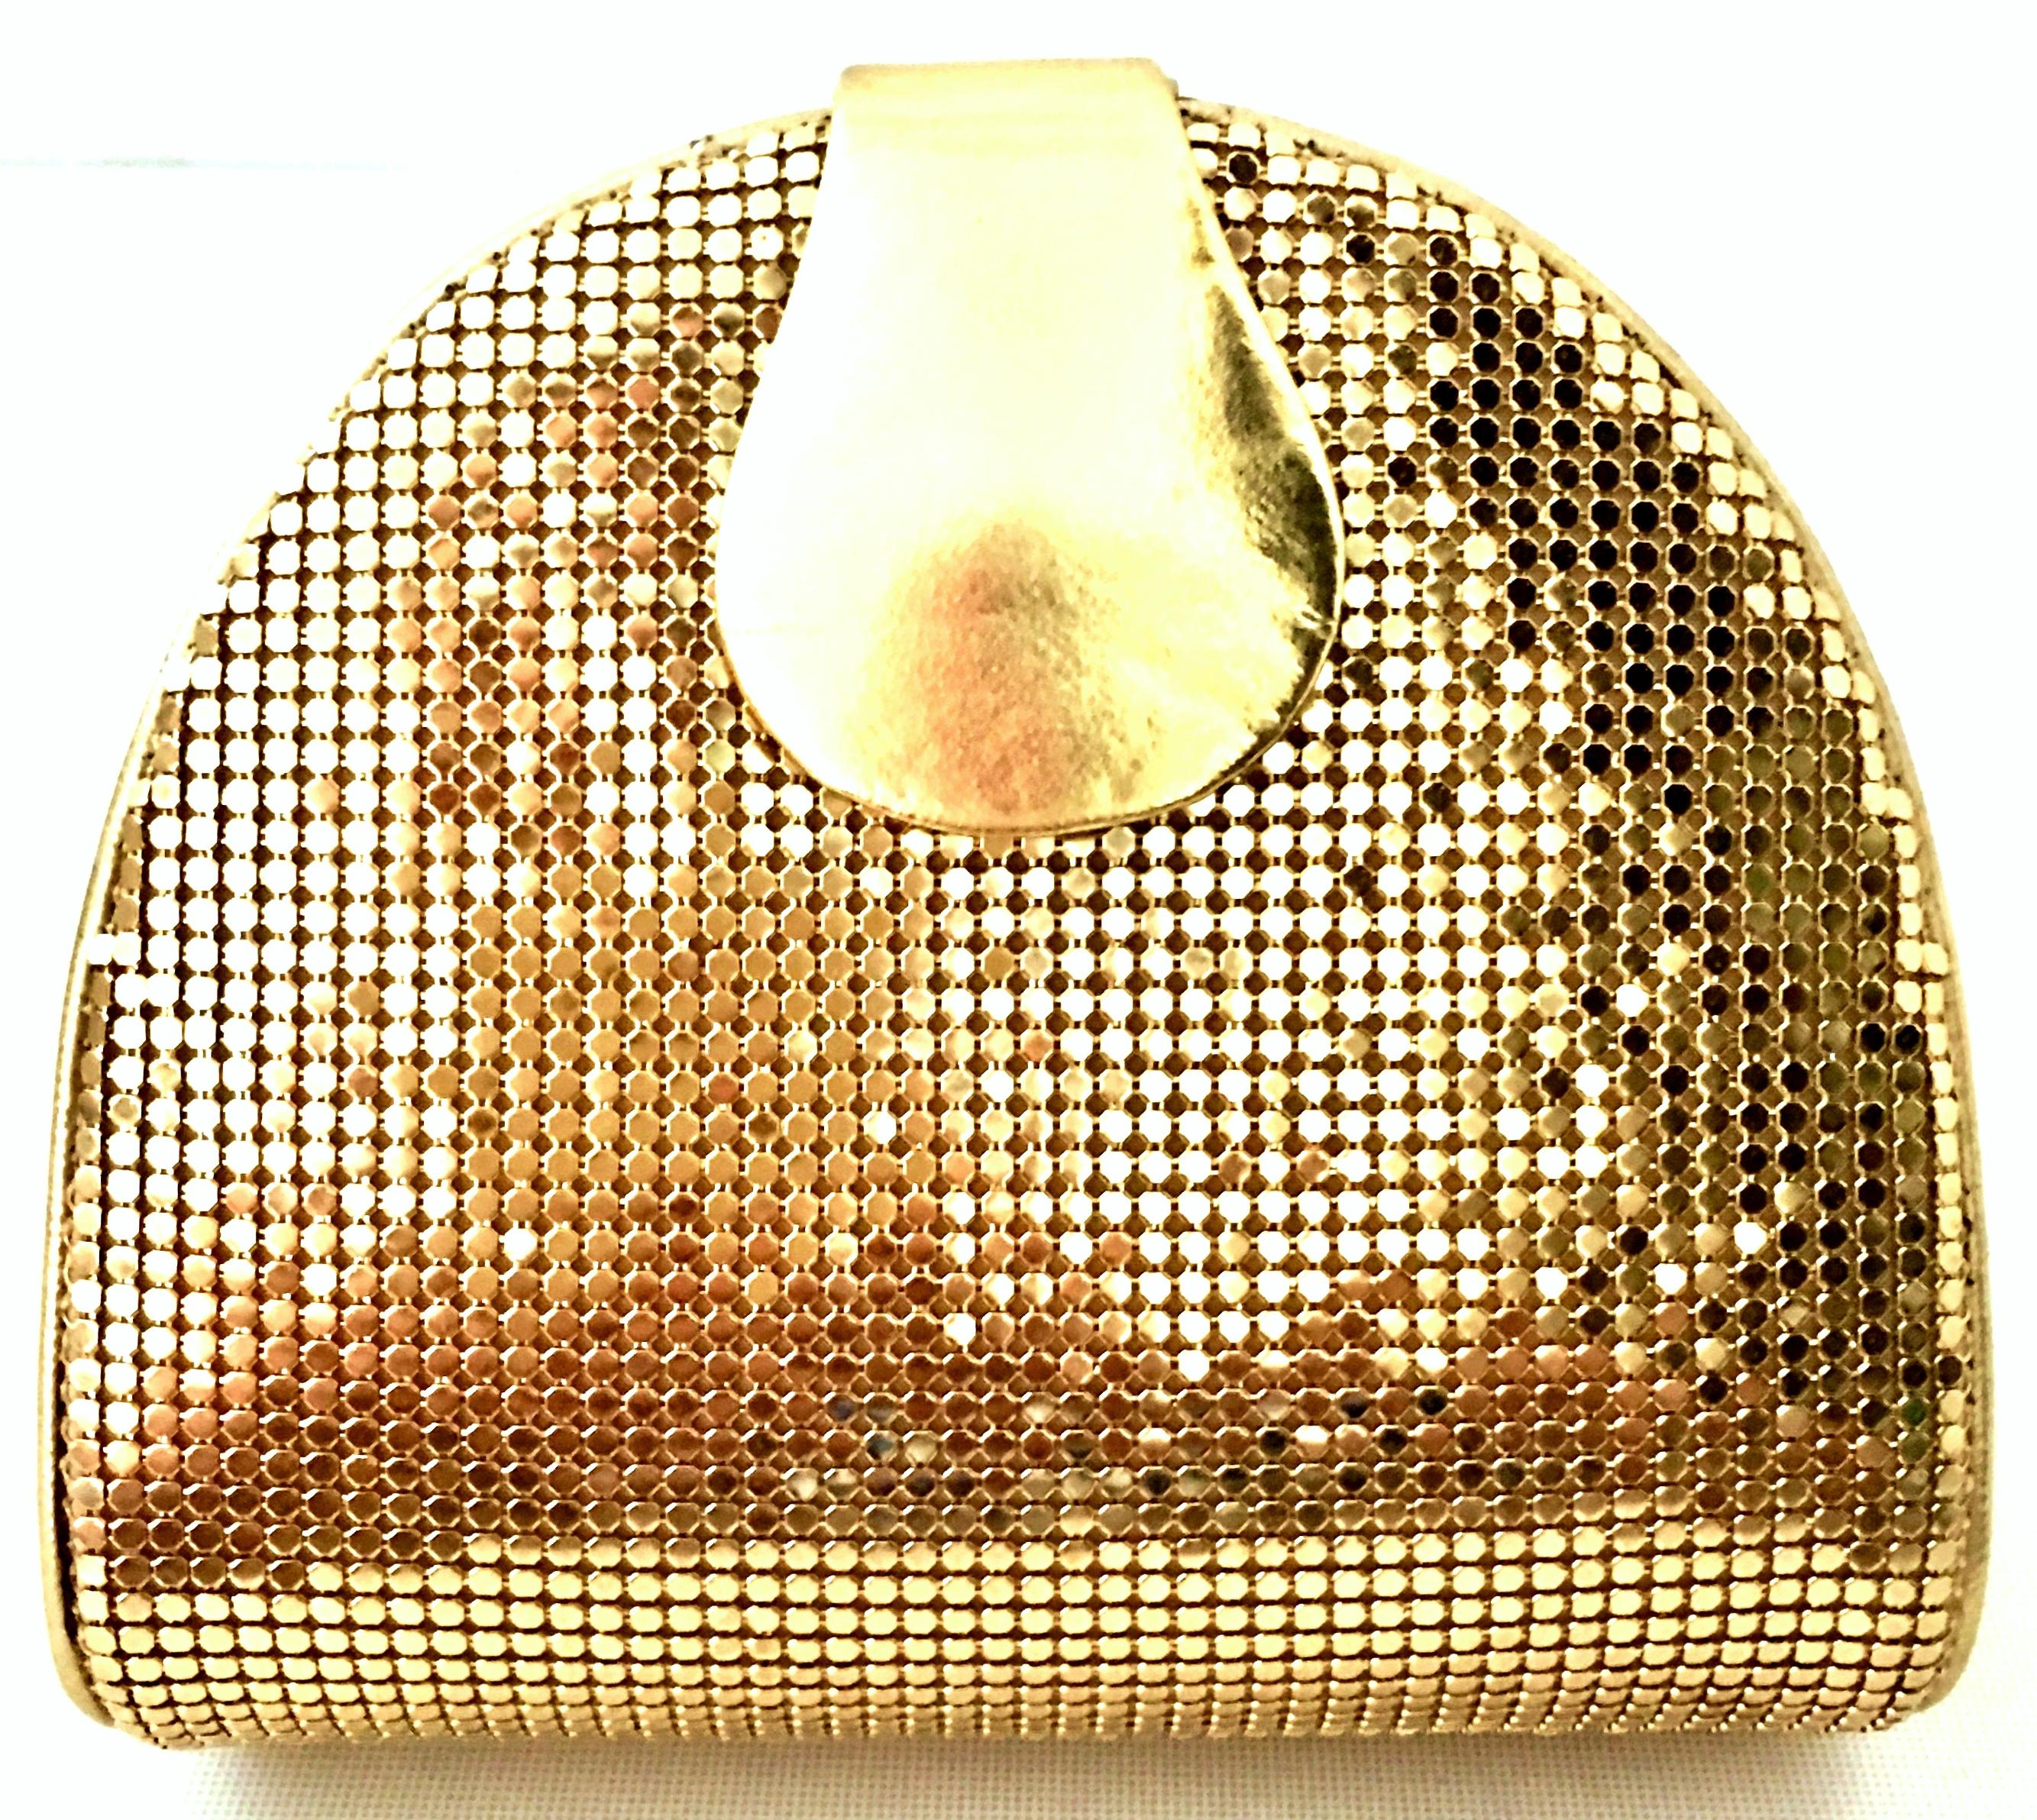 20th Century Whiting & Davis Gold Metal Mesh & Gold Metallic Leather Hand Bag. This unique hard sided clutch, cross boy or shoulder hand bag features a gold plate chain link shoulder strap that can be tucked in when not in use. The gold chain link